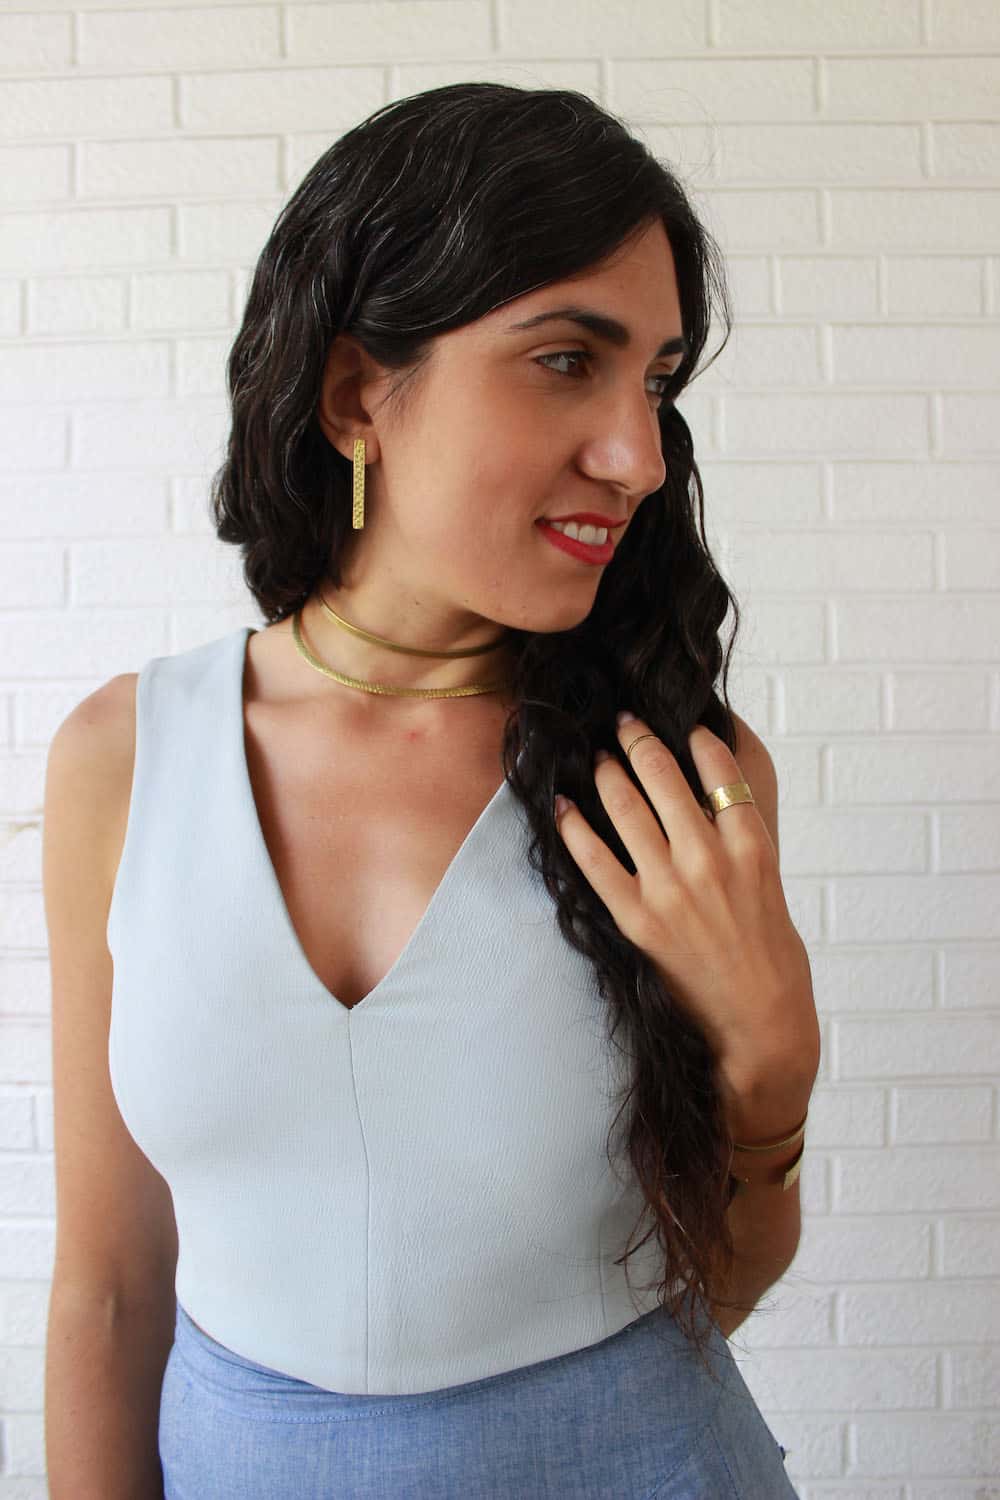 This New Jewelry Collection Is Made From Upcycled War Remains